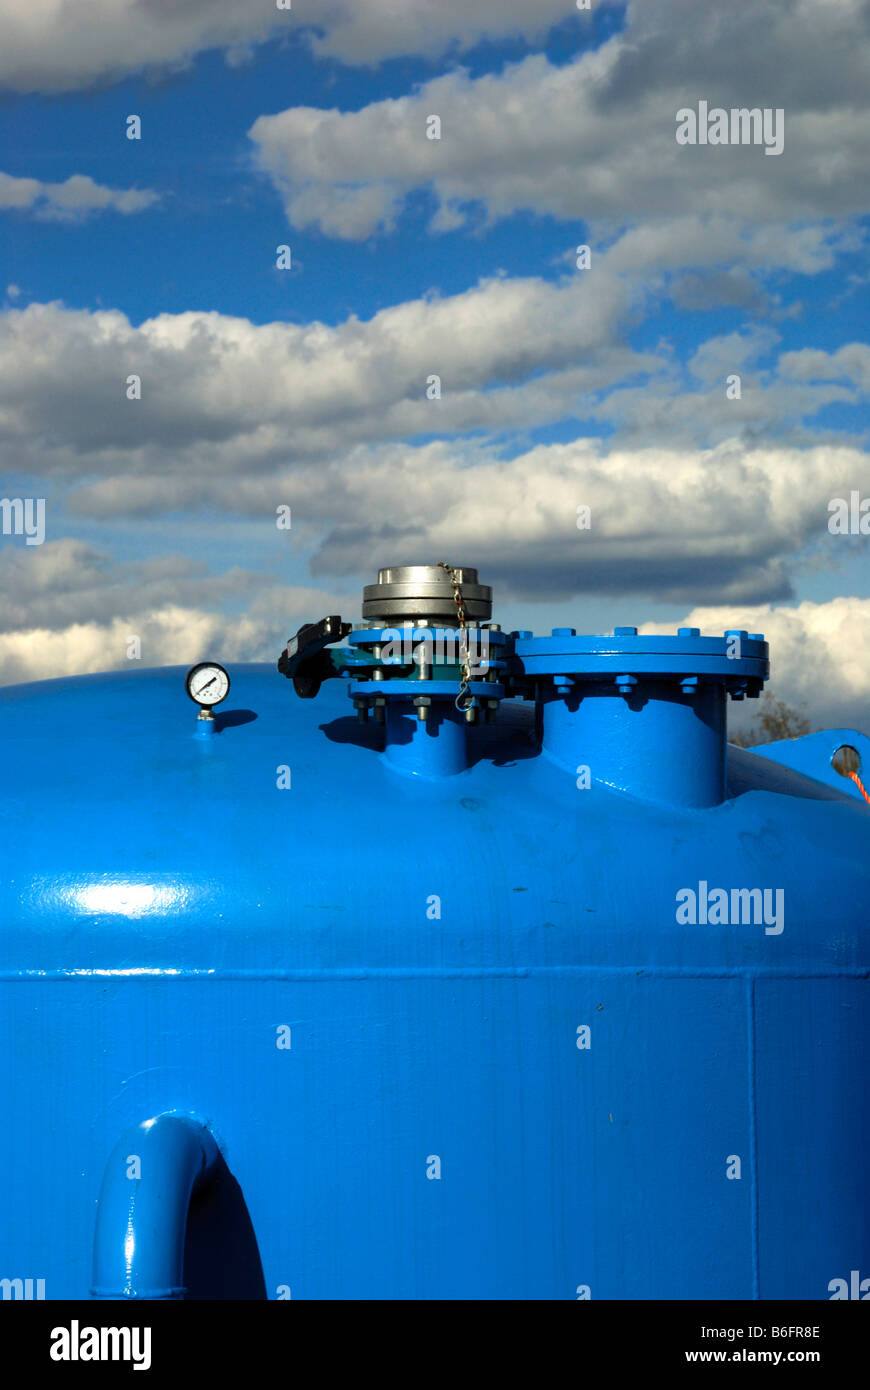 Groundwater purification plant, blue container in front of a blue sky, Baden-Wuerttemberg, Germany Stock Photo